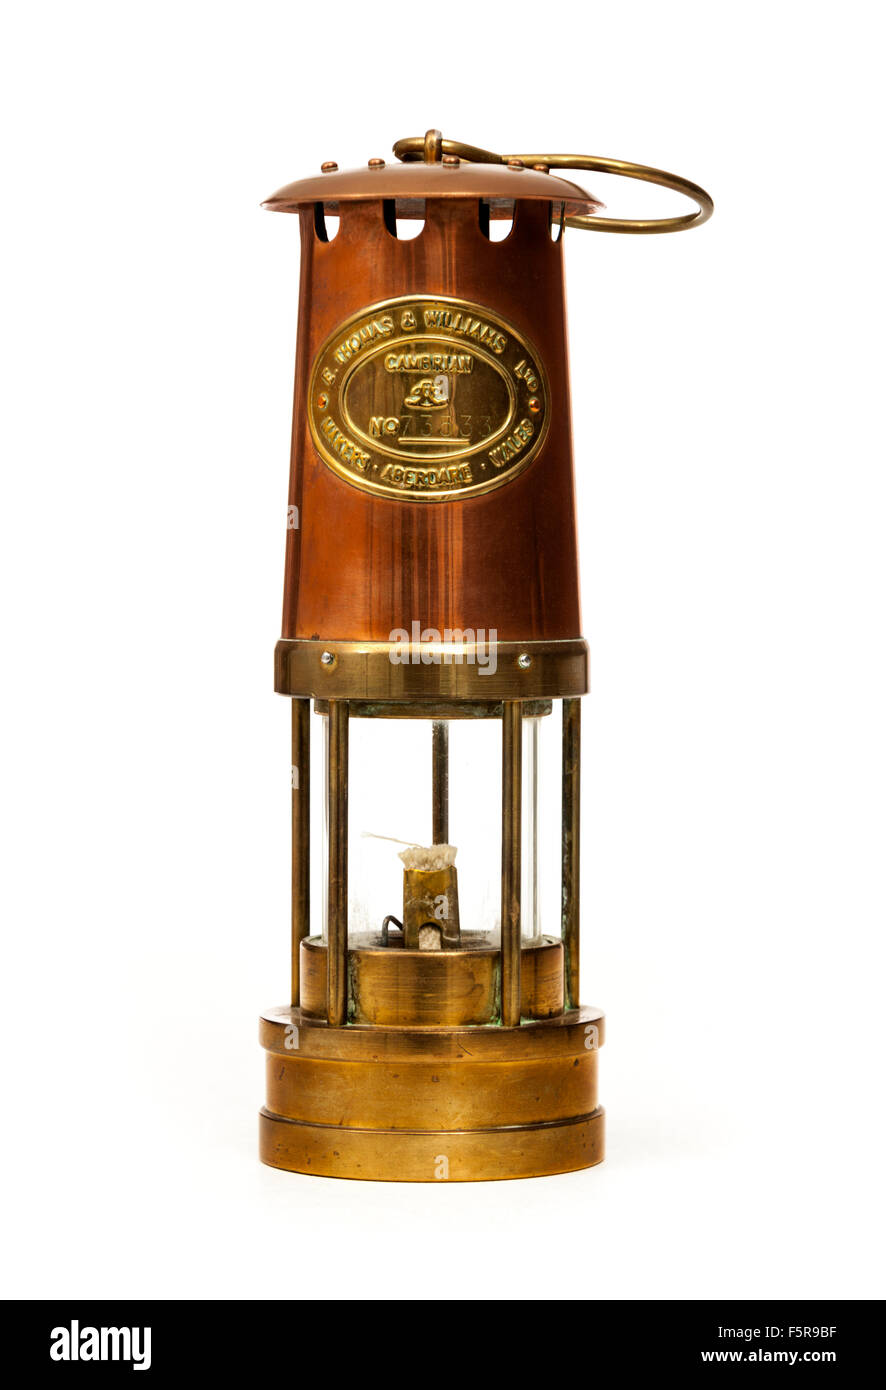 Vintage coal mining safety lamp by E. Thomas & Williams Ltd, Aberdare, Wales. Serial number 73533. Stock Photo